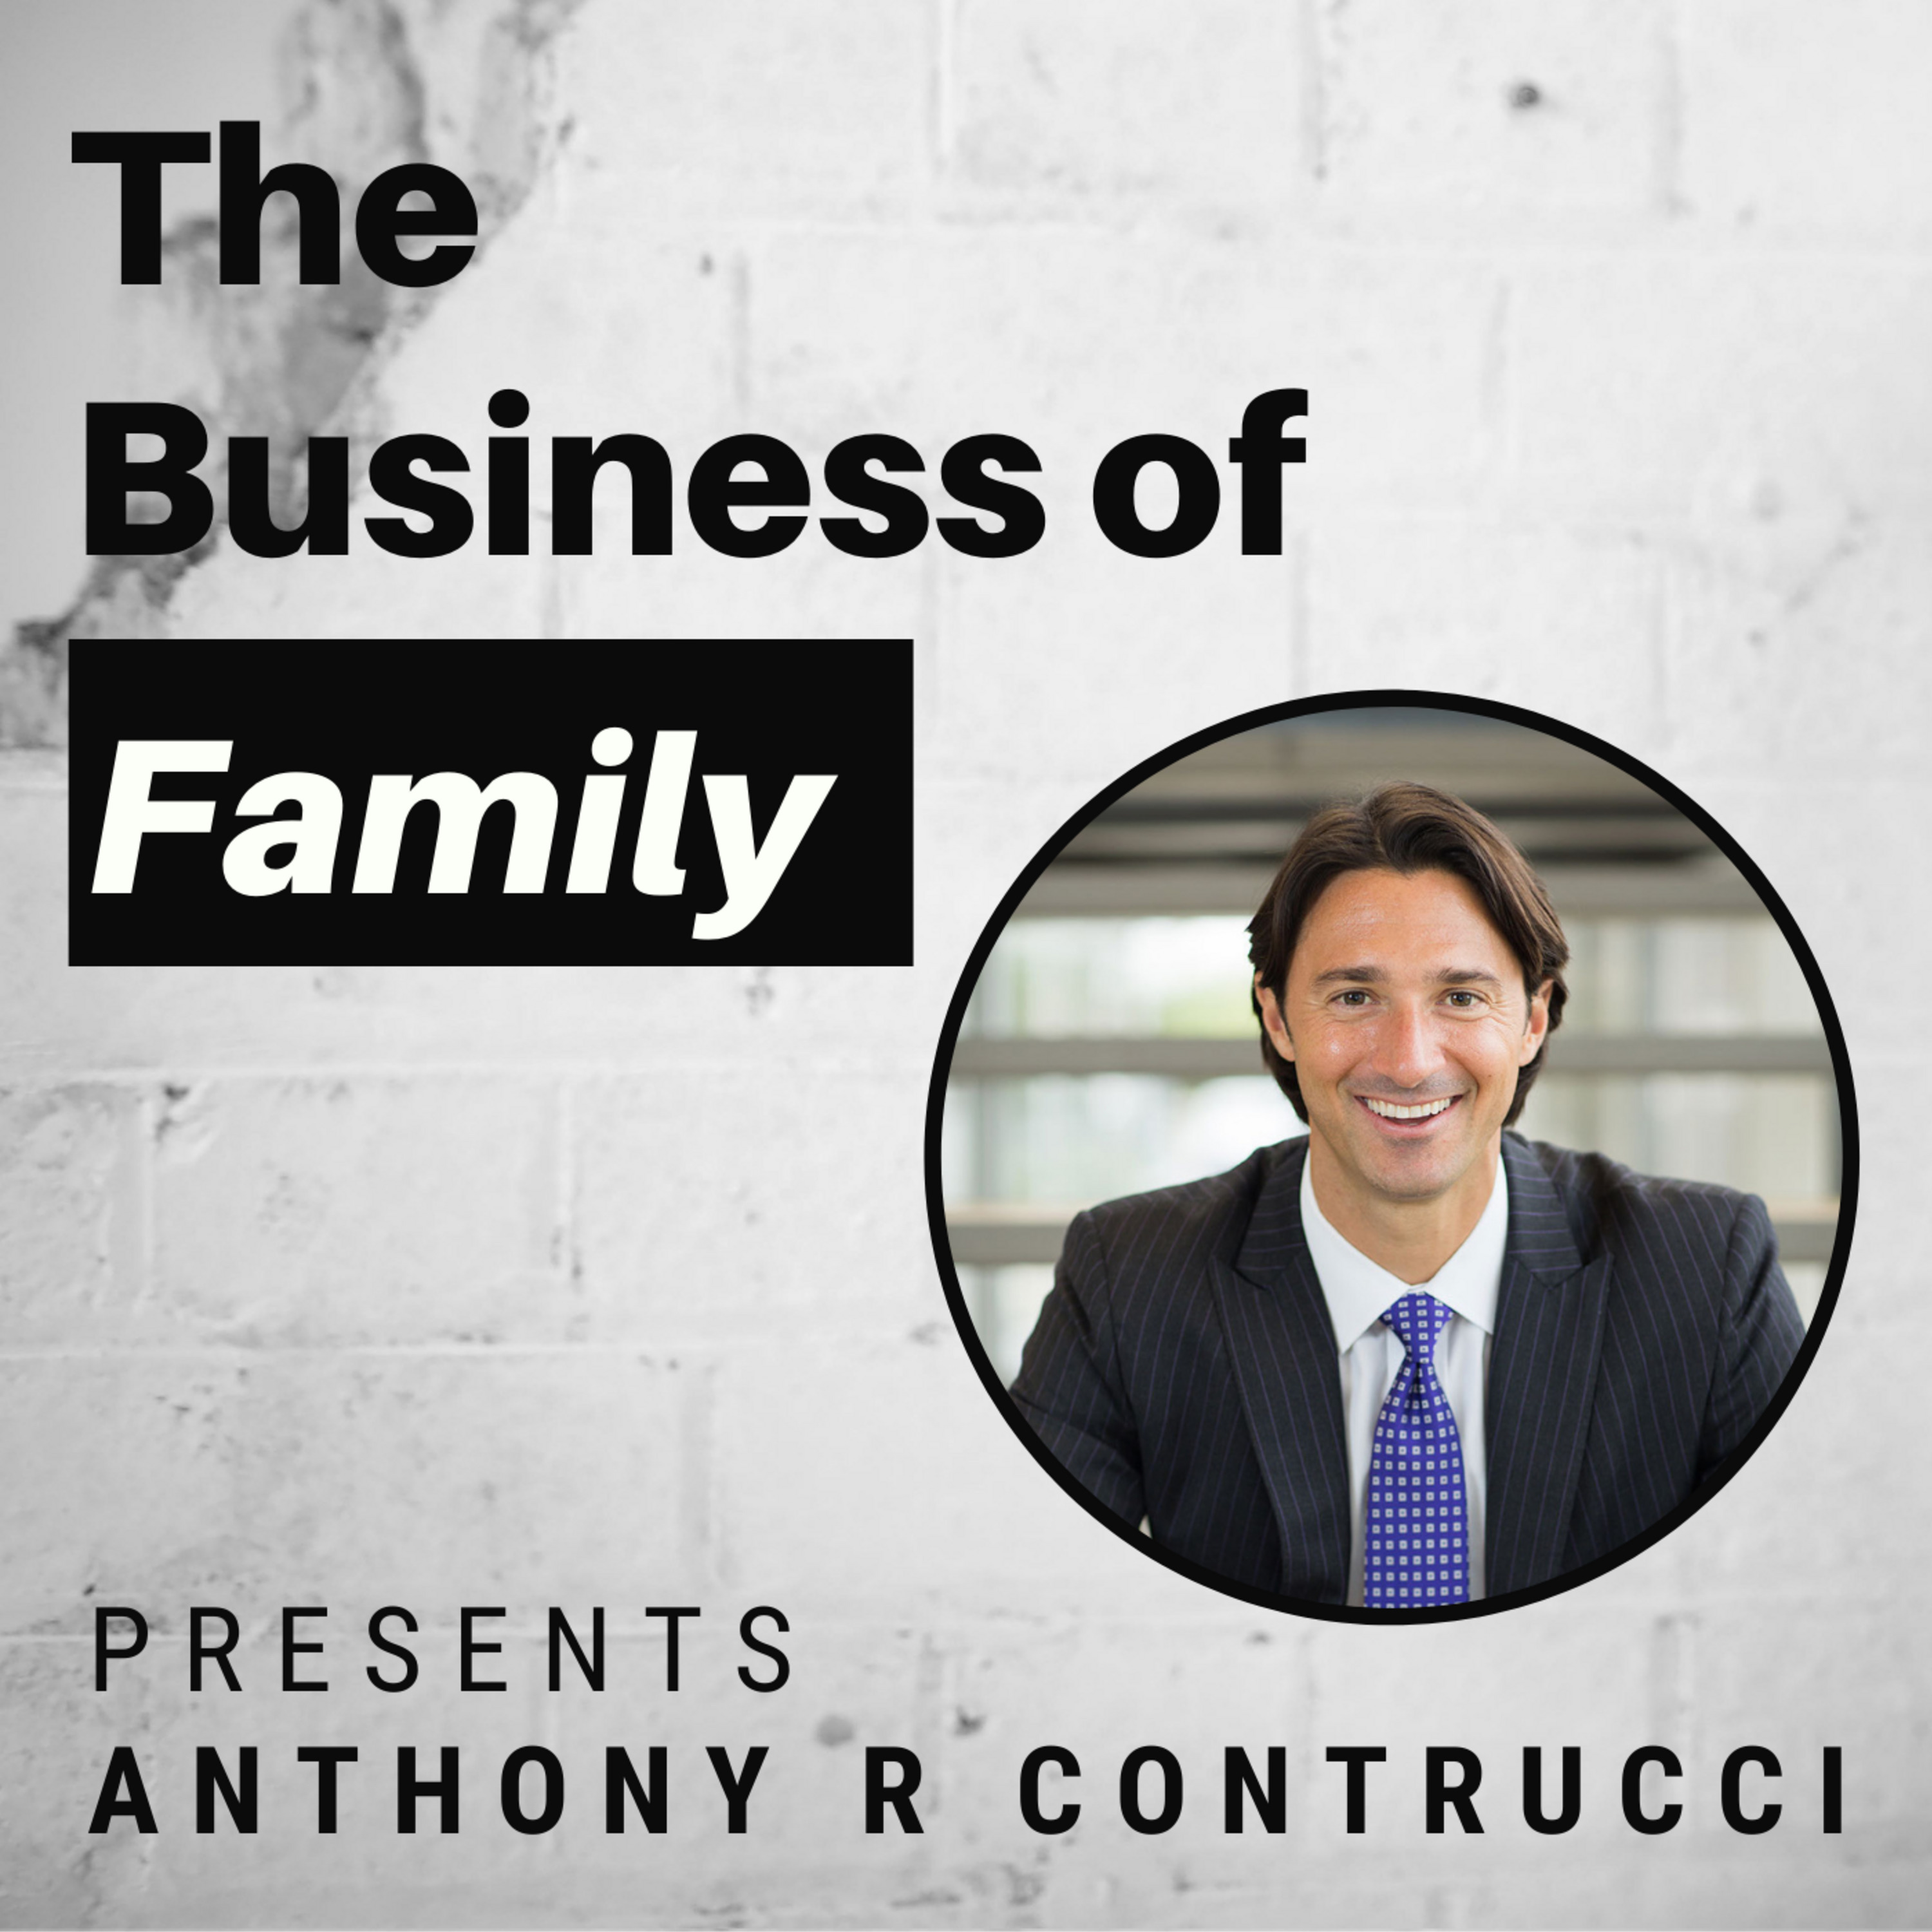 Anthony R Contrucci - A 5th Generation Member of the Schrage Family, Owners of the 126 Year Old Centier Bank